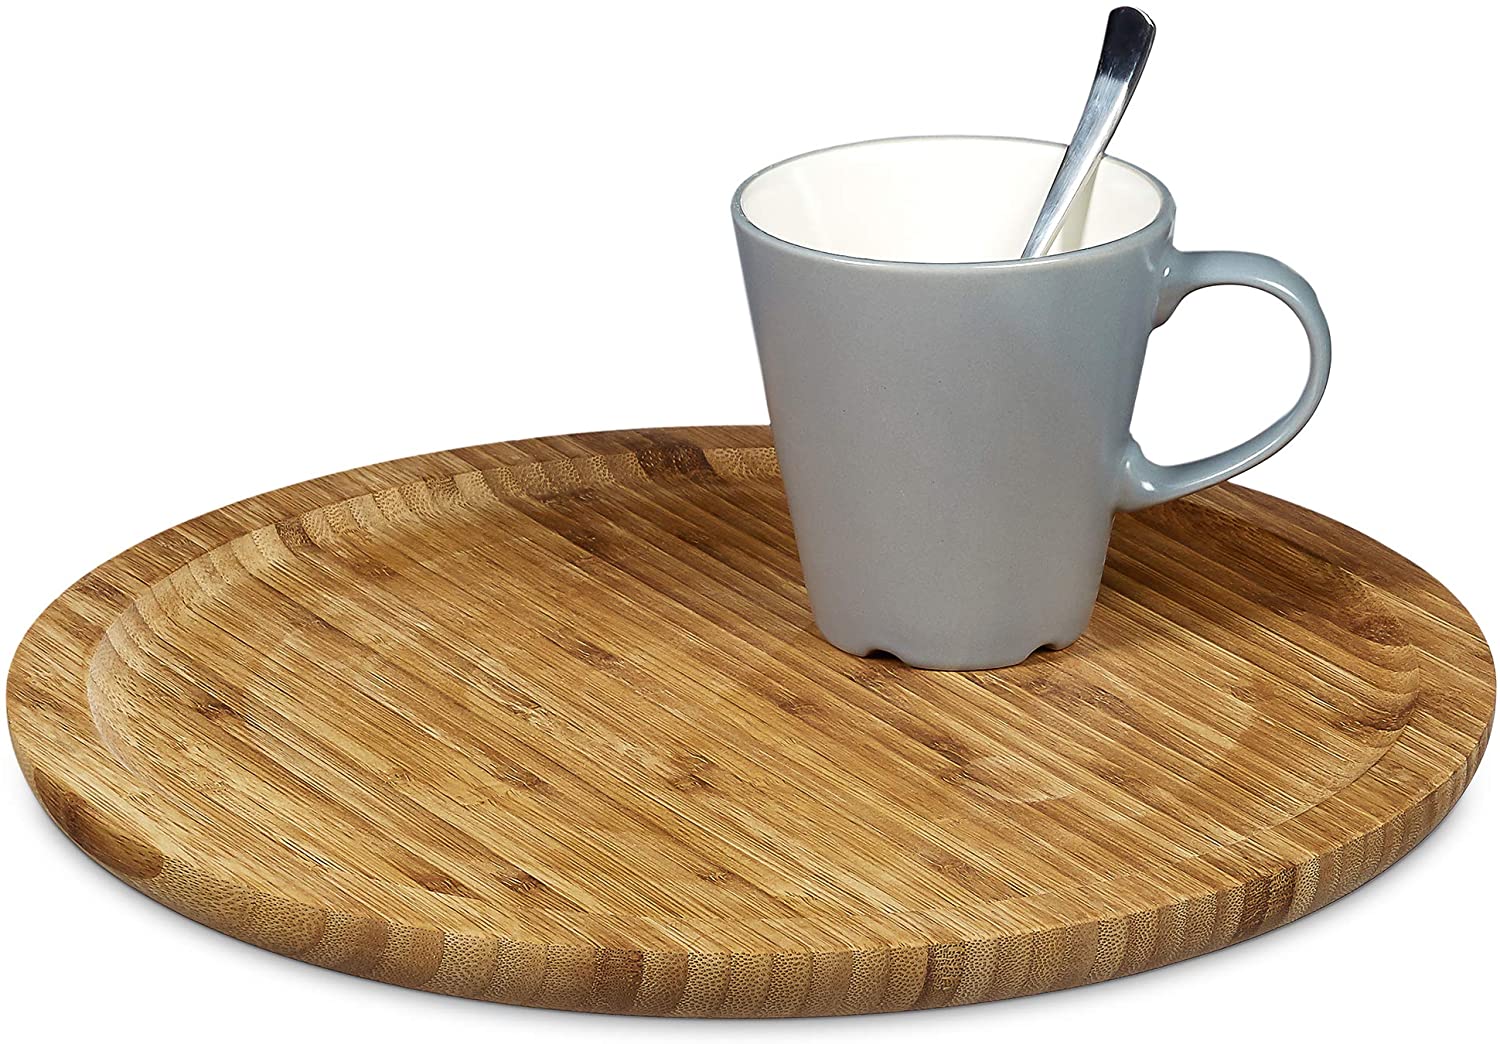 Relaxdays Round bamboo serving plate, diameter approx. 33 cm, bamboo plate for serving as a serving plate and serving tray for sausage, cheese, fruit, pastries, snacks and much more. Can also be used as a decorative plate, natural